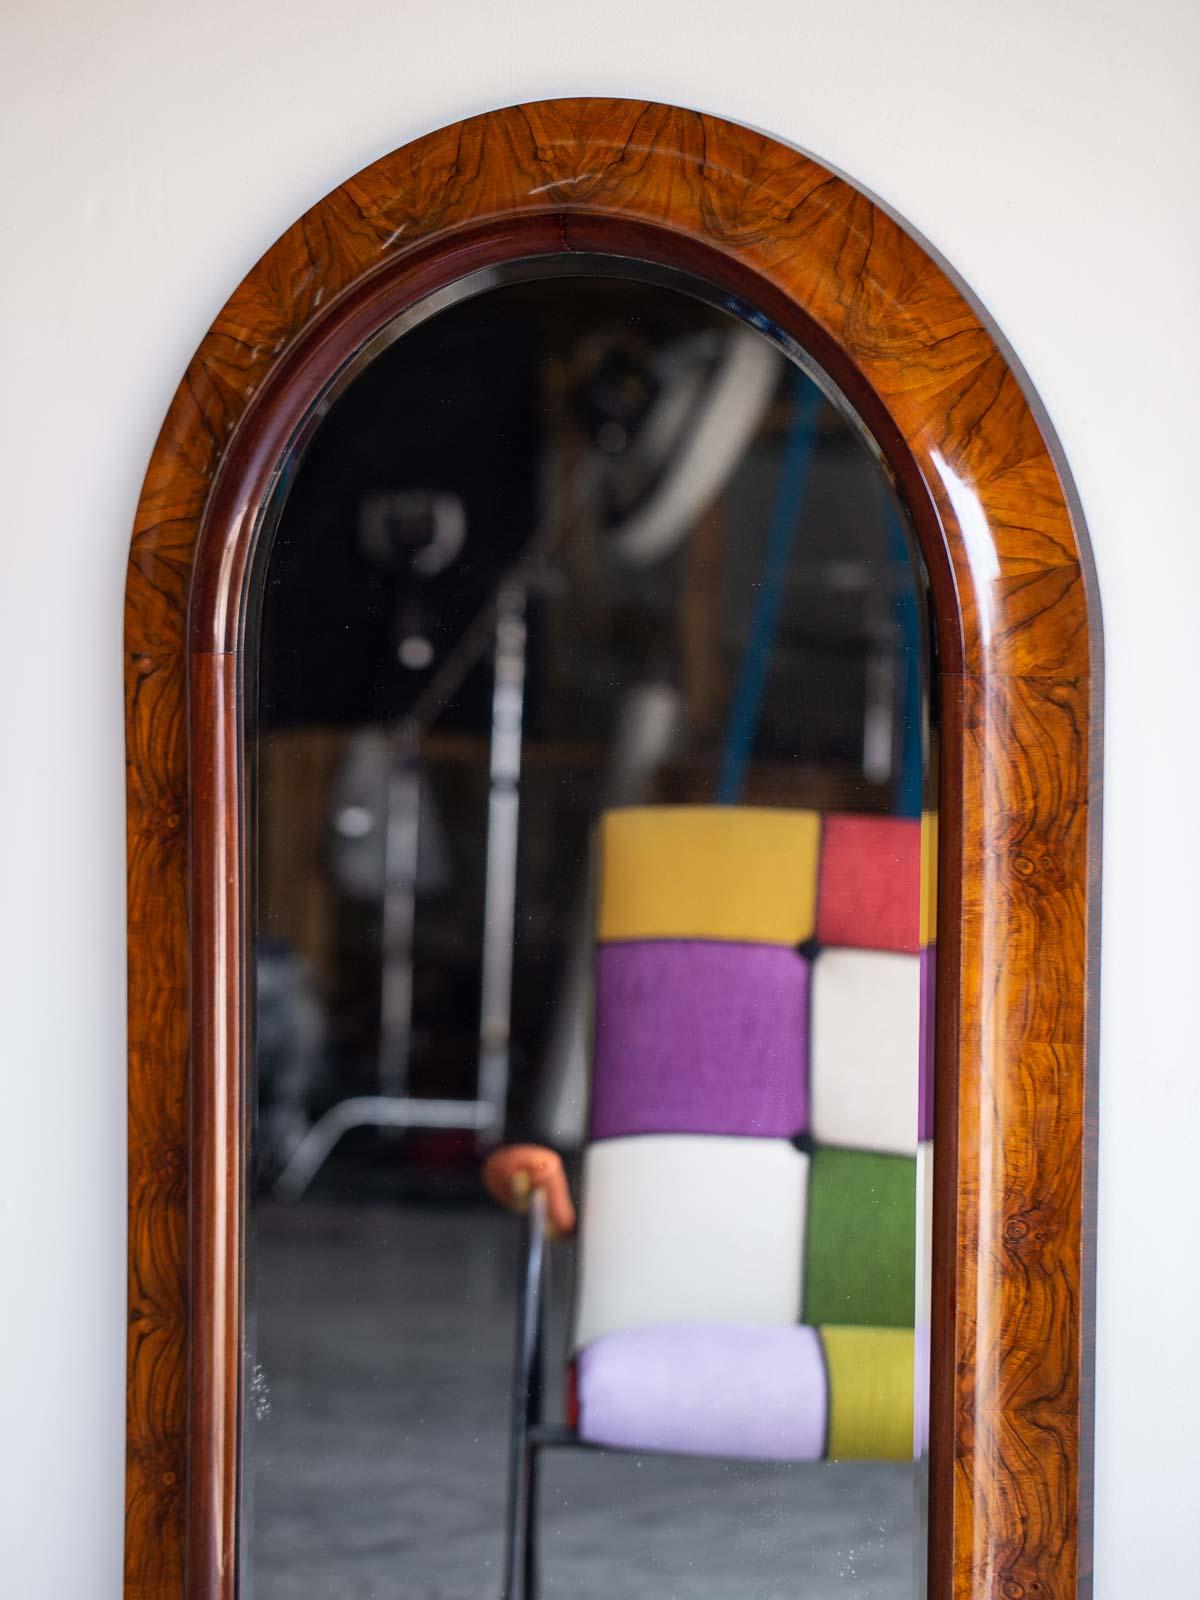 A handsome Art Deco period vintage Austrian burl walnut mirror from Austria circa 1930. The simplicity of this mirror's design is emblematic of the superb aesthetic of the Art Deco with its emphasis on exceptional materials and beautifully edited